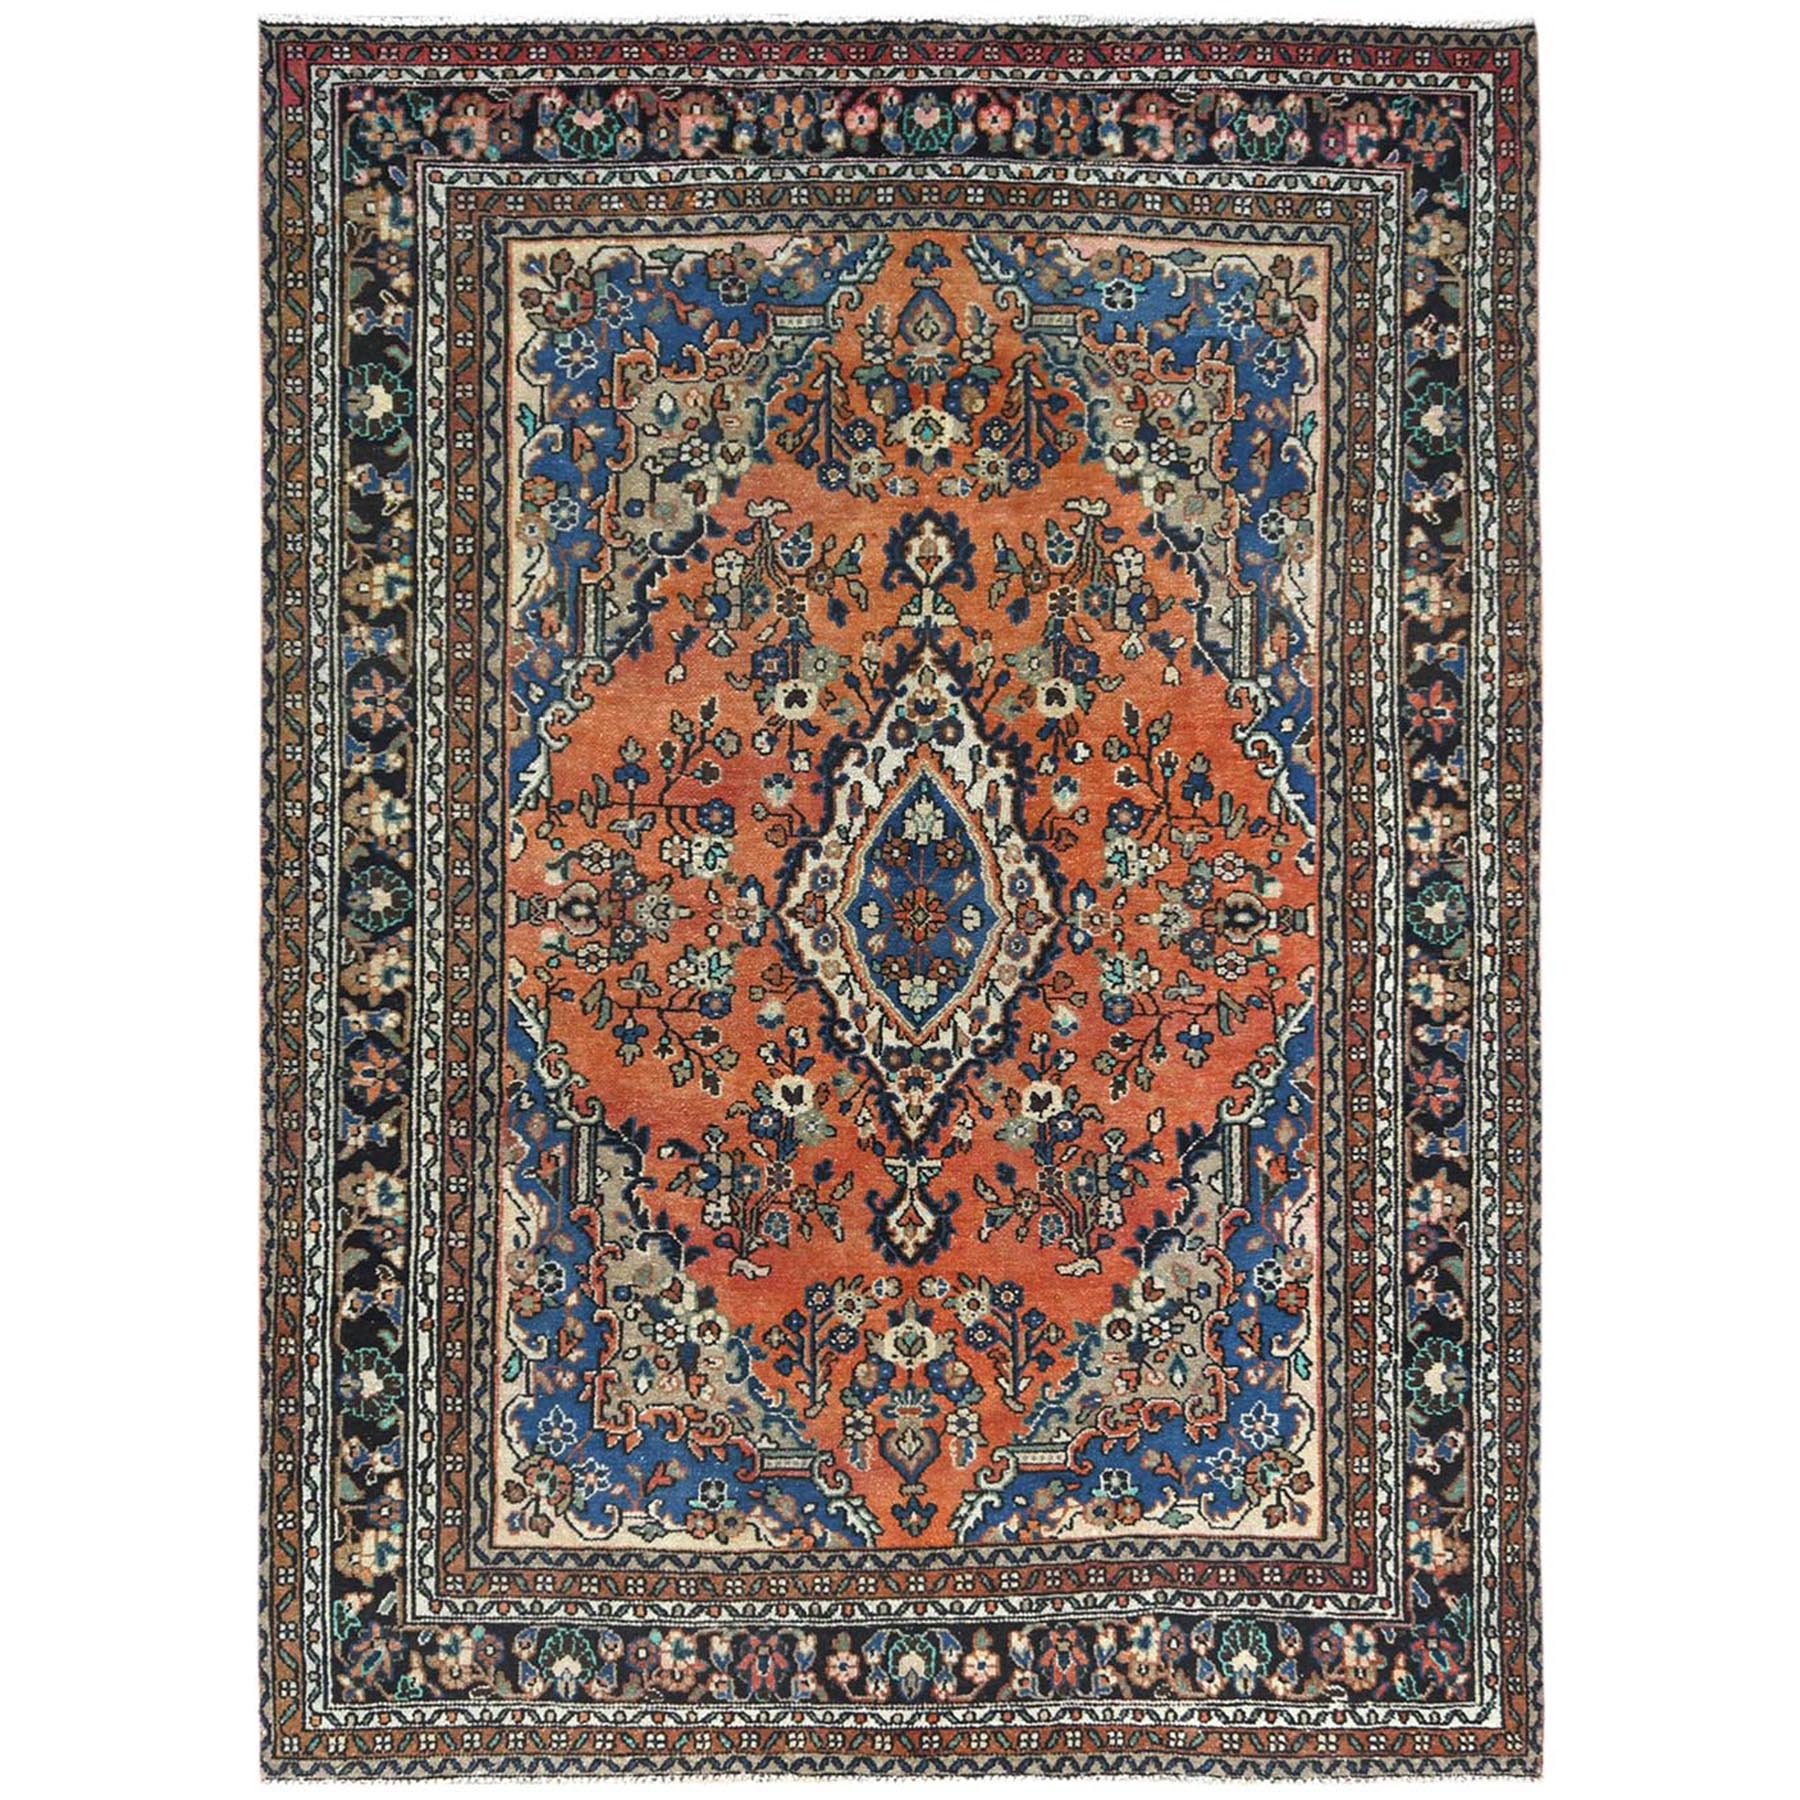  Wool Hand-Knotted Area Rug 7'4